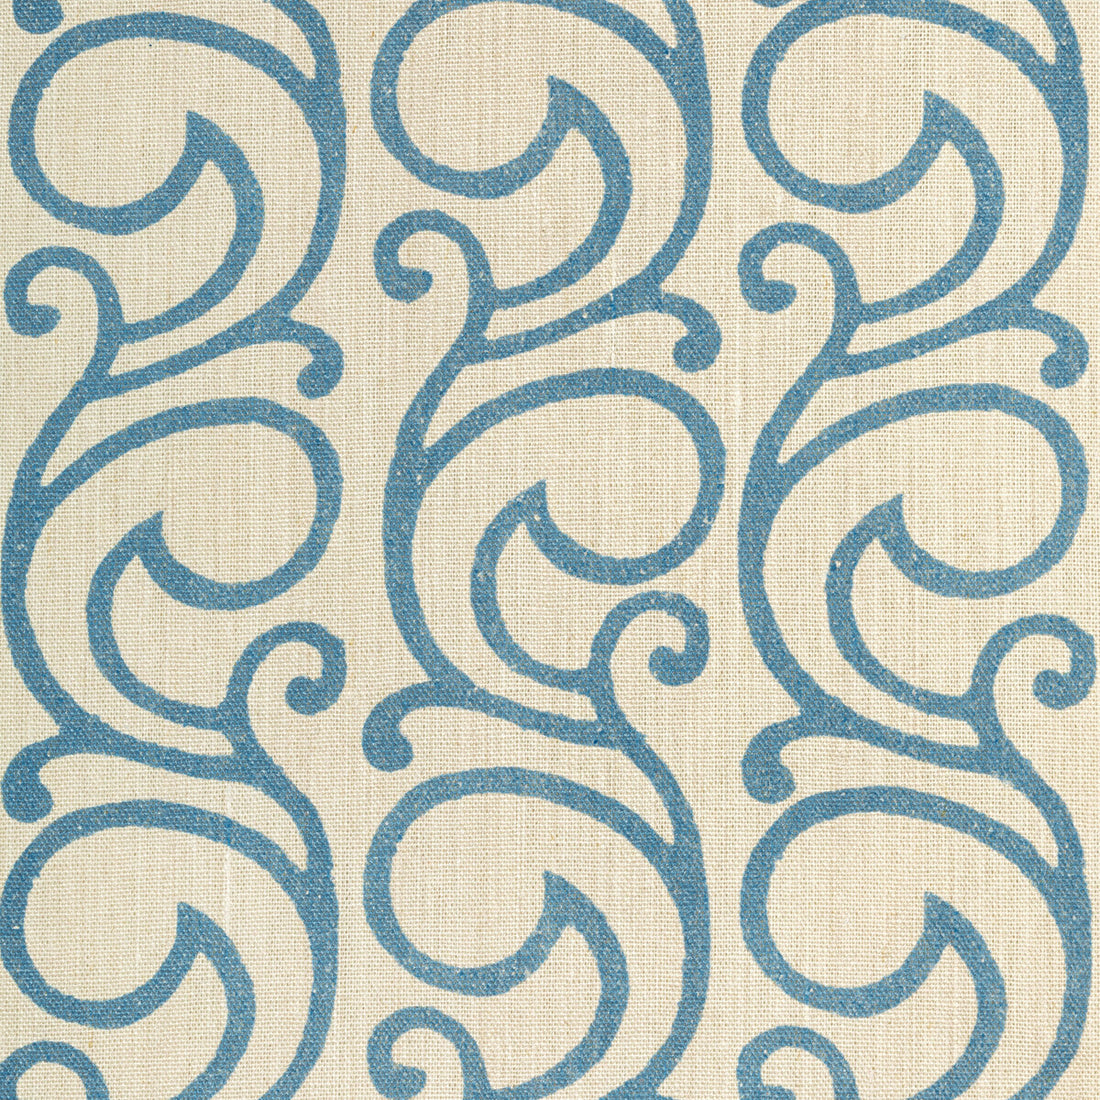 Serendipity Scroll fabric in bay color - pattern 2022103.516.0 - by Lee Jofa in the Sarah Bartholomew collection